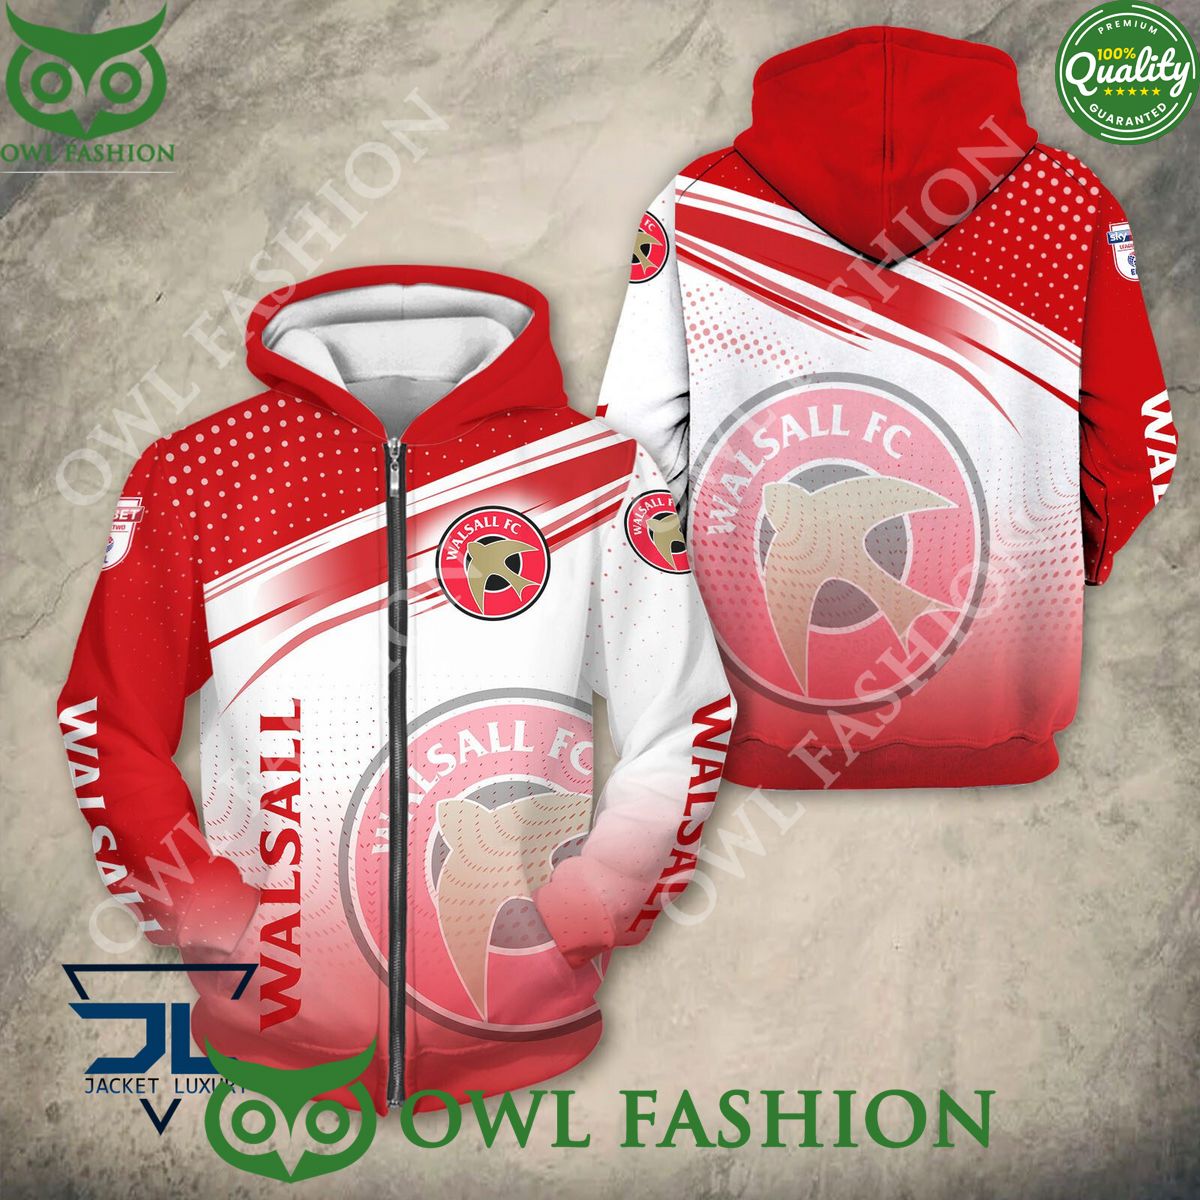 Walsall FC Club Logo EFL Hoodie Shirt Natural and awesome